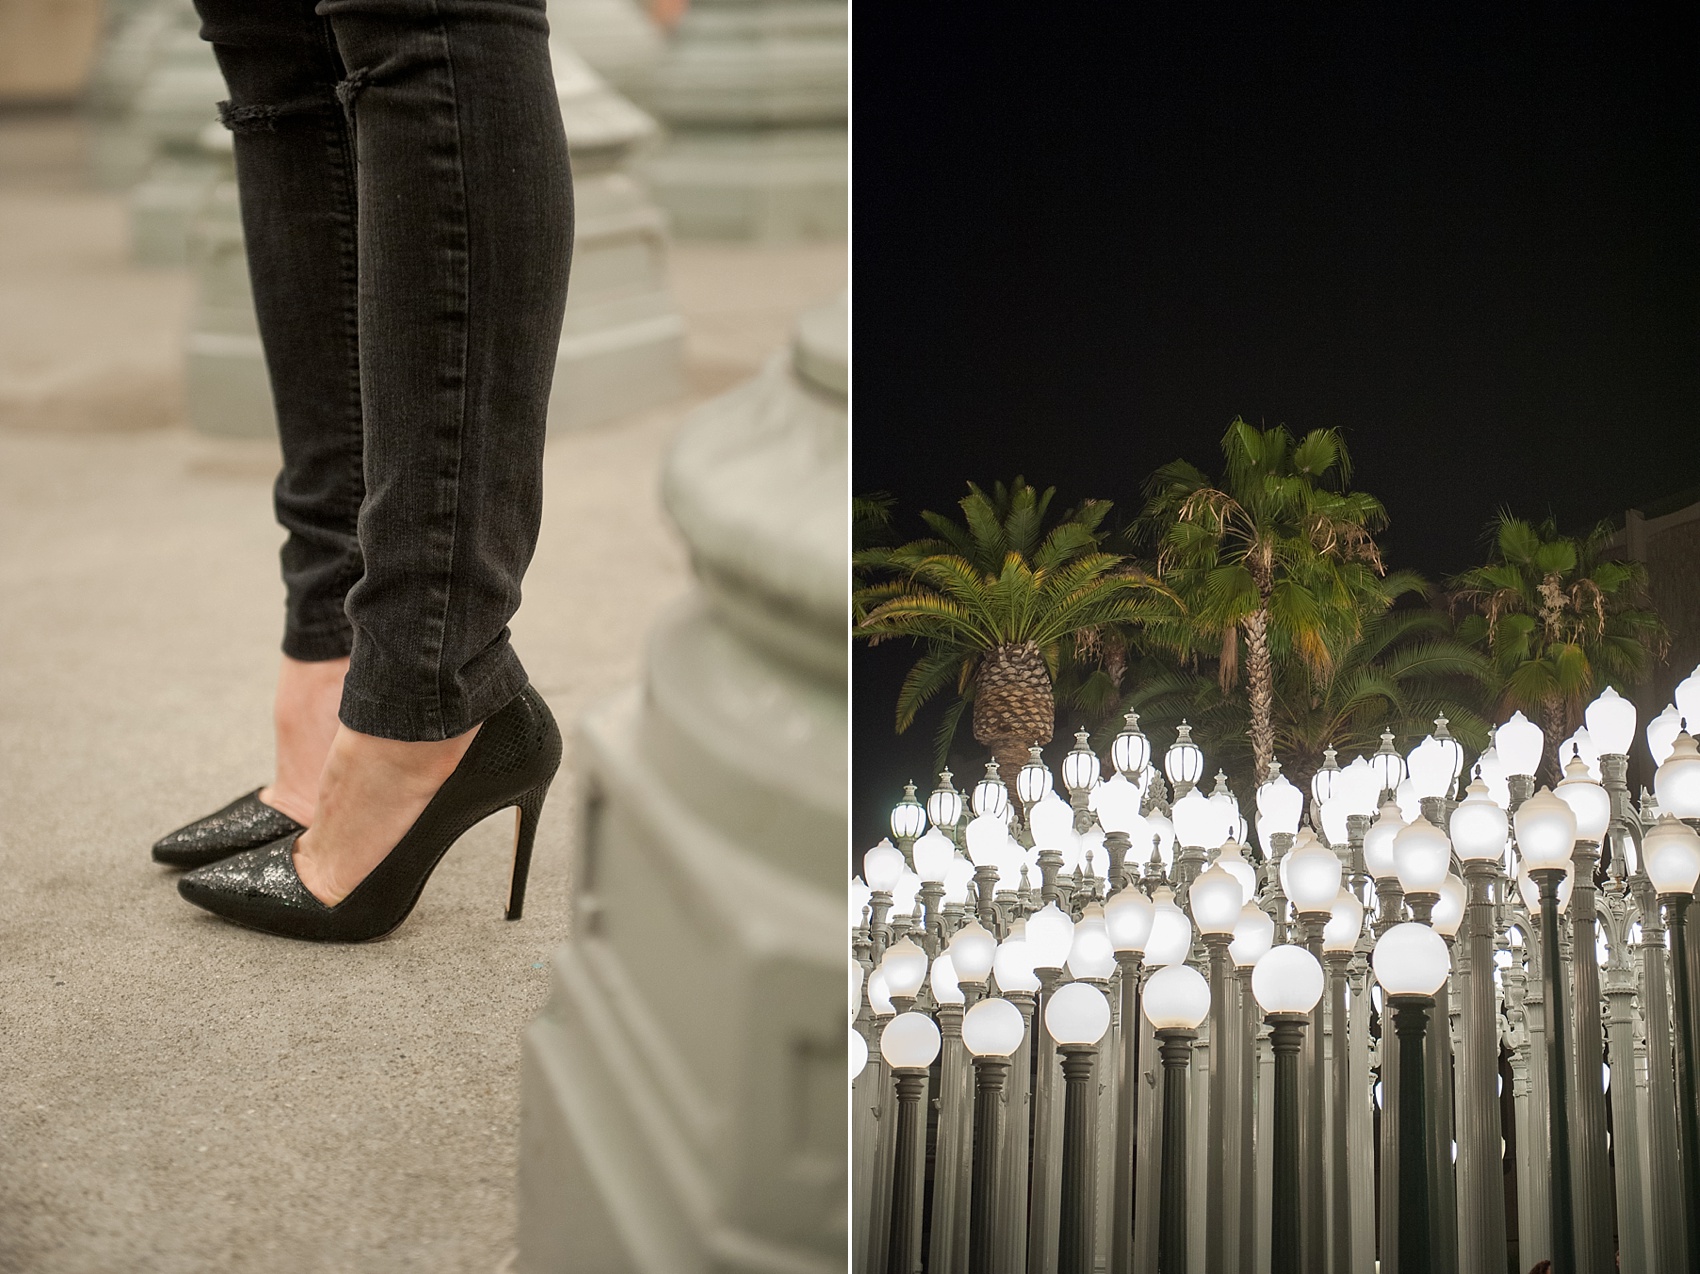 Engagement photos at the LA lamp posts, Los Angeles County of Art. Photos by LA wedding photographer, Mikkel Paige Photography.